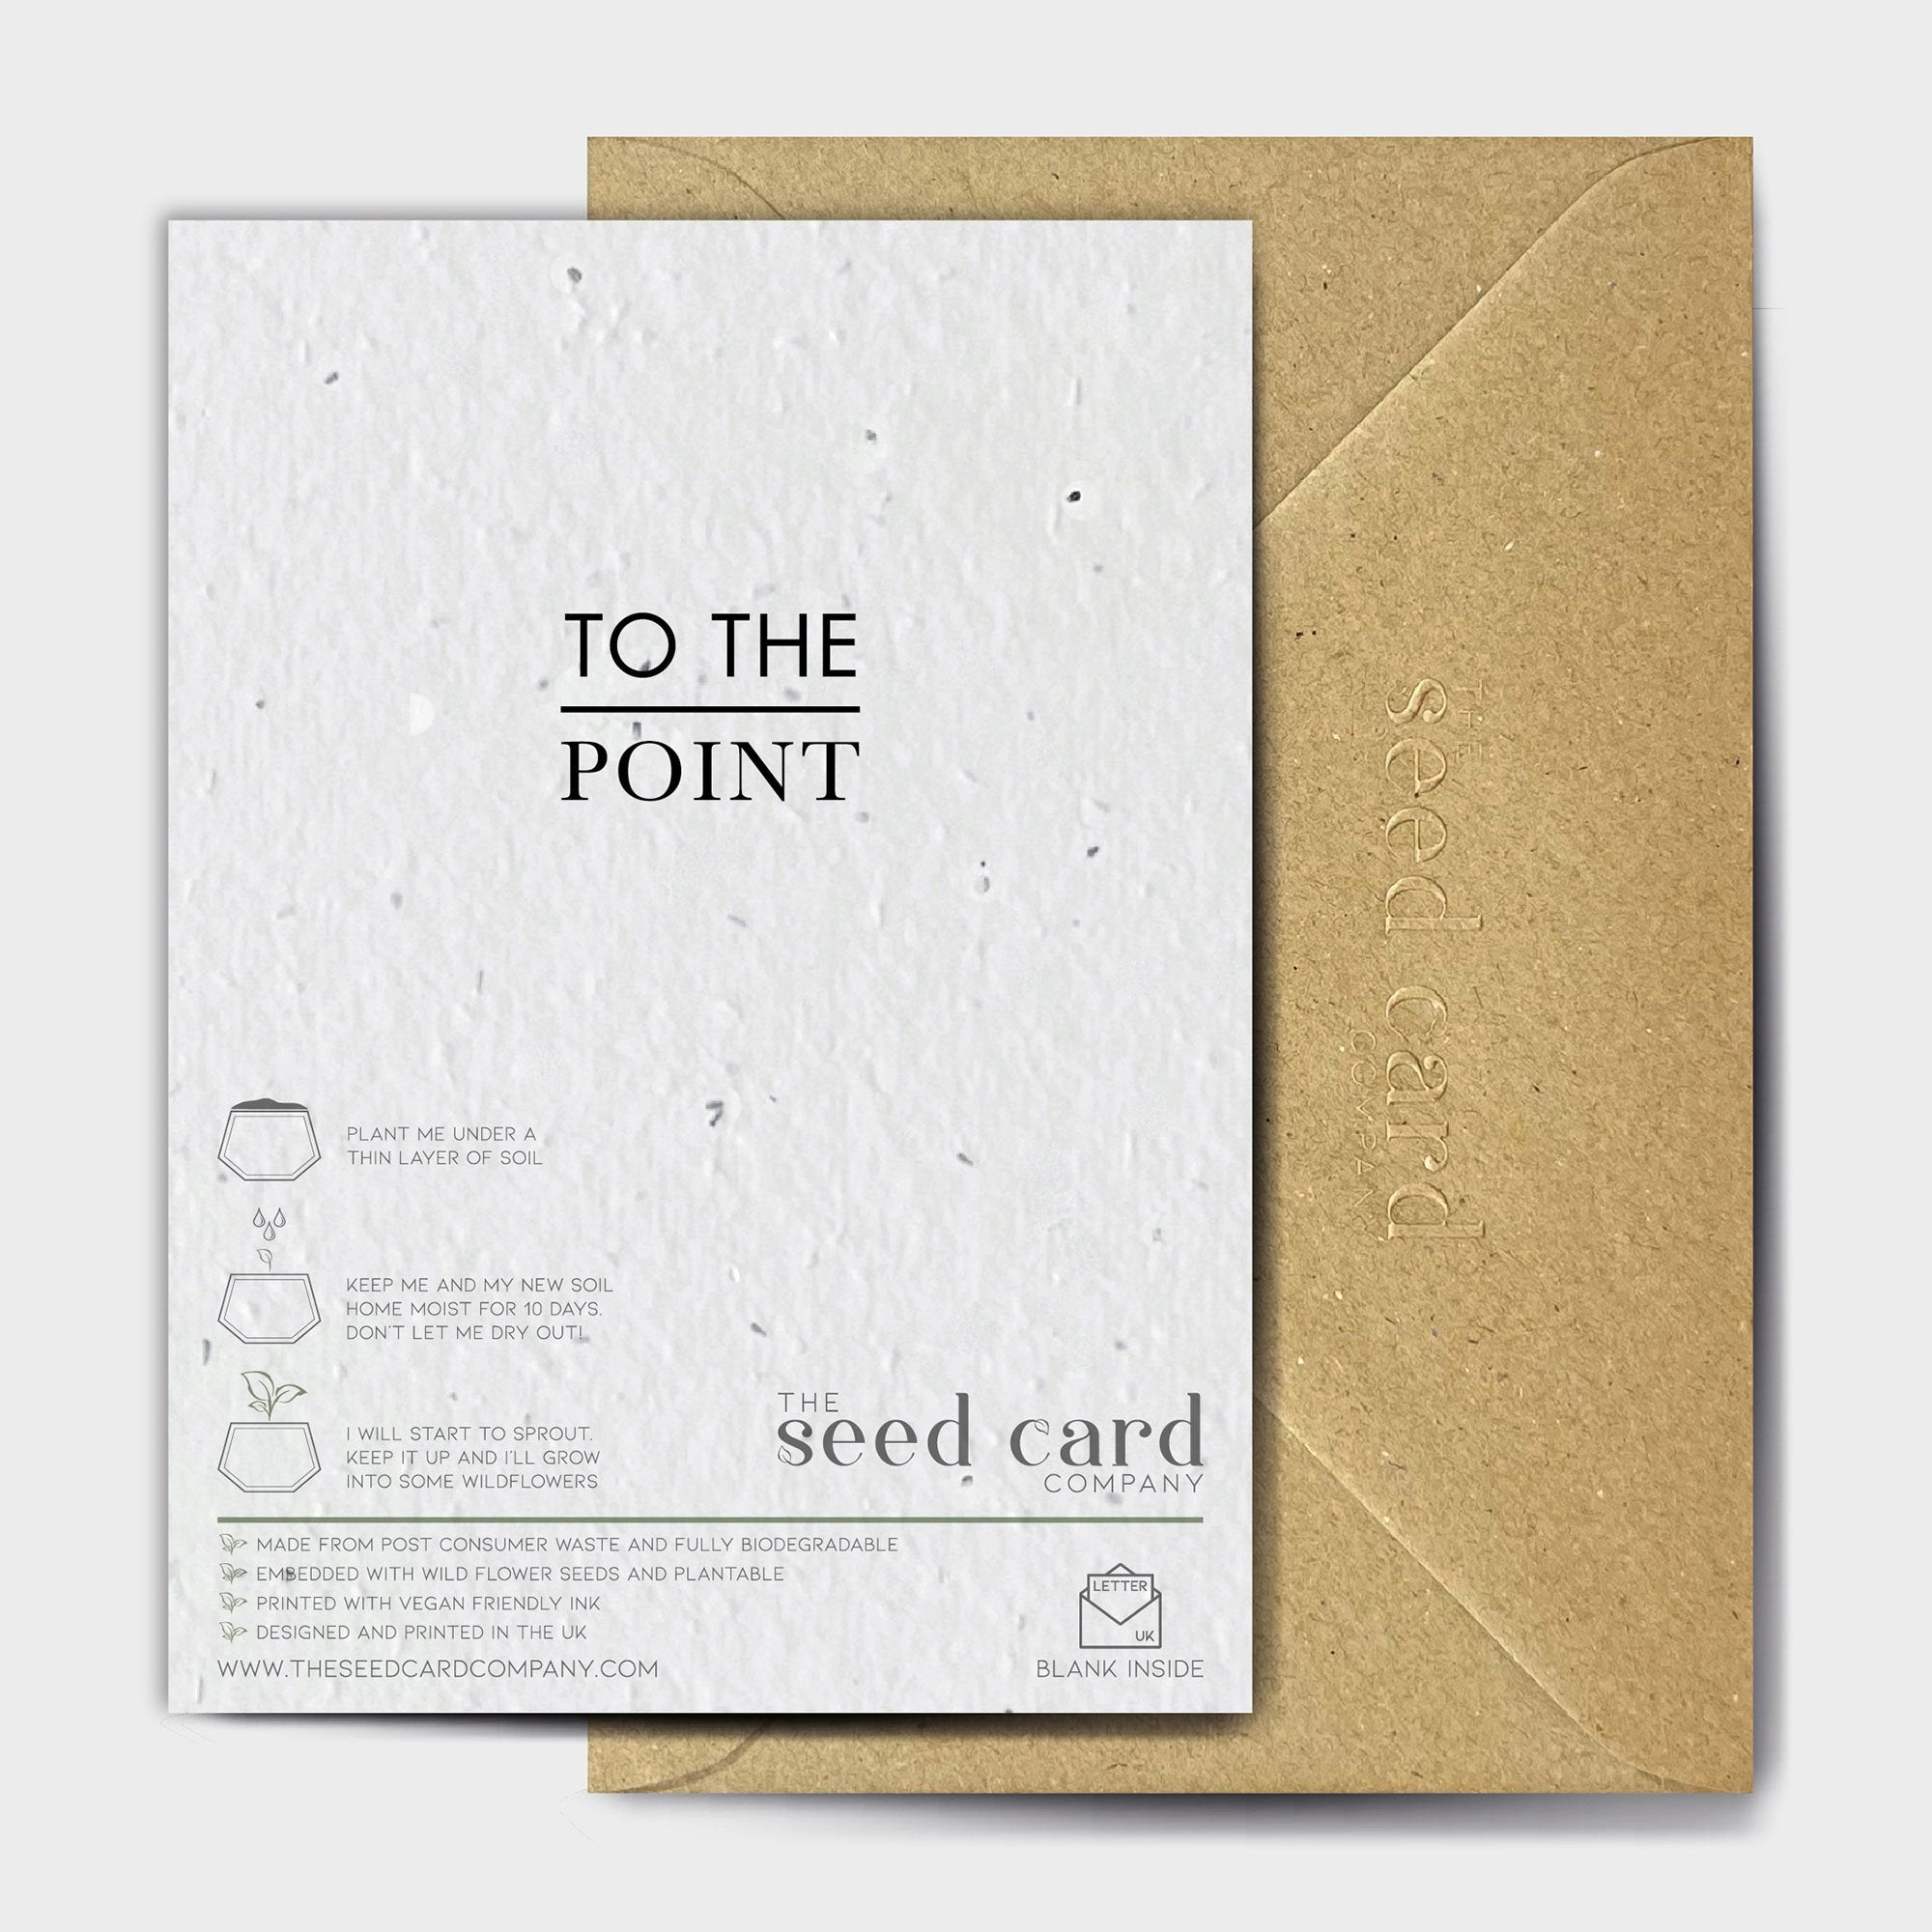 Shop online Personal Preference - 100% biodegradable seed-embedded cards Shop -The Seed Card Company